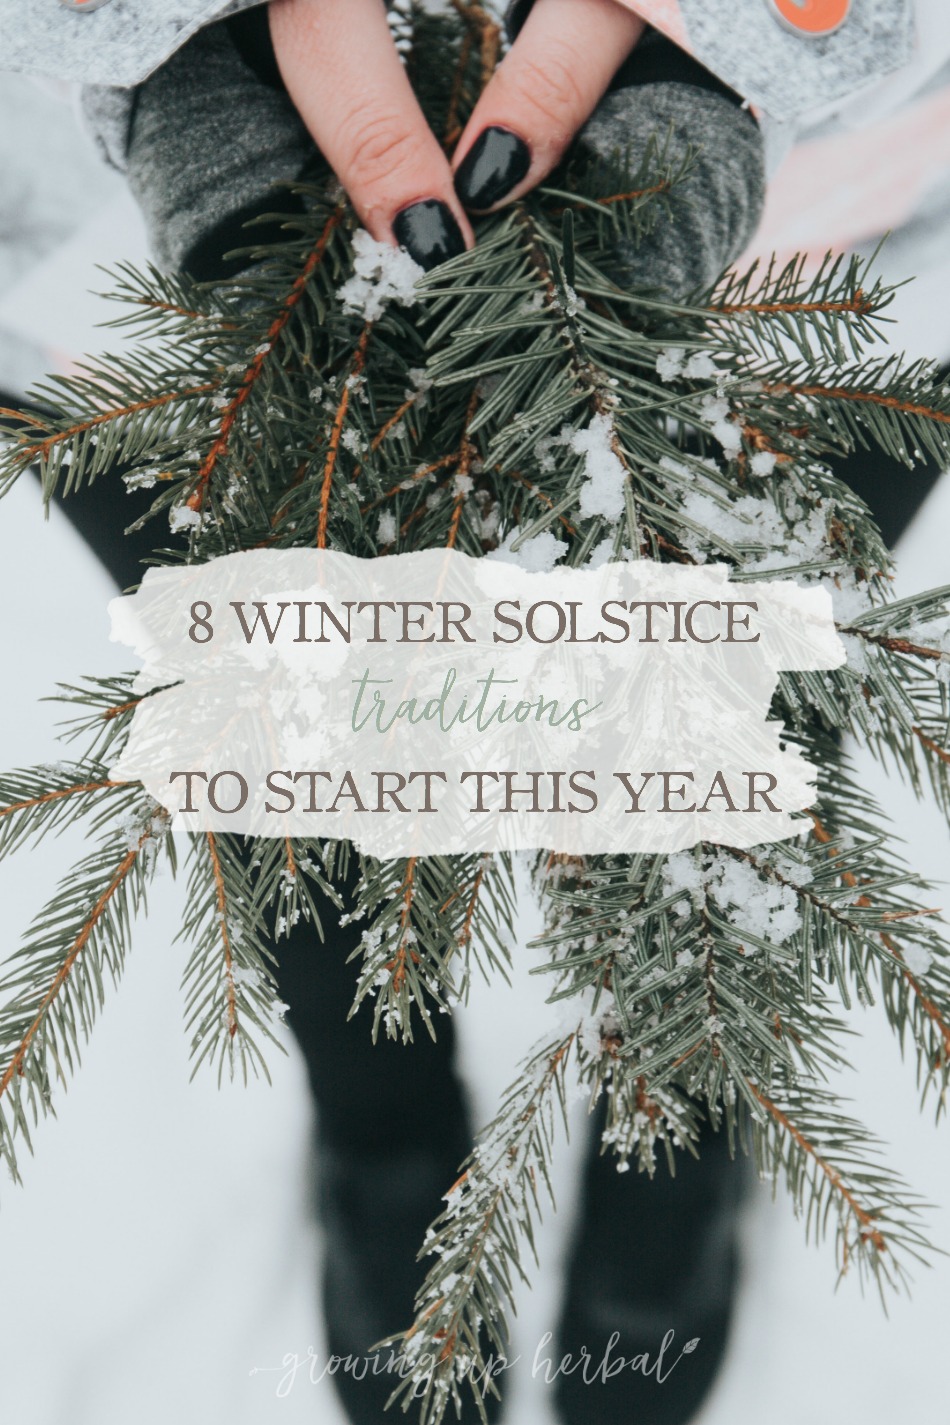 8 Winter Solstice Traditions To Start This Year Growing Up Herbal